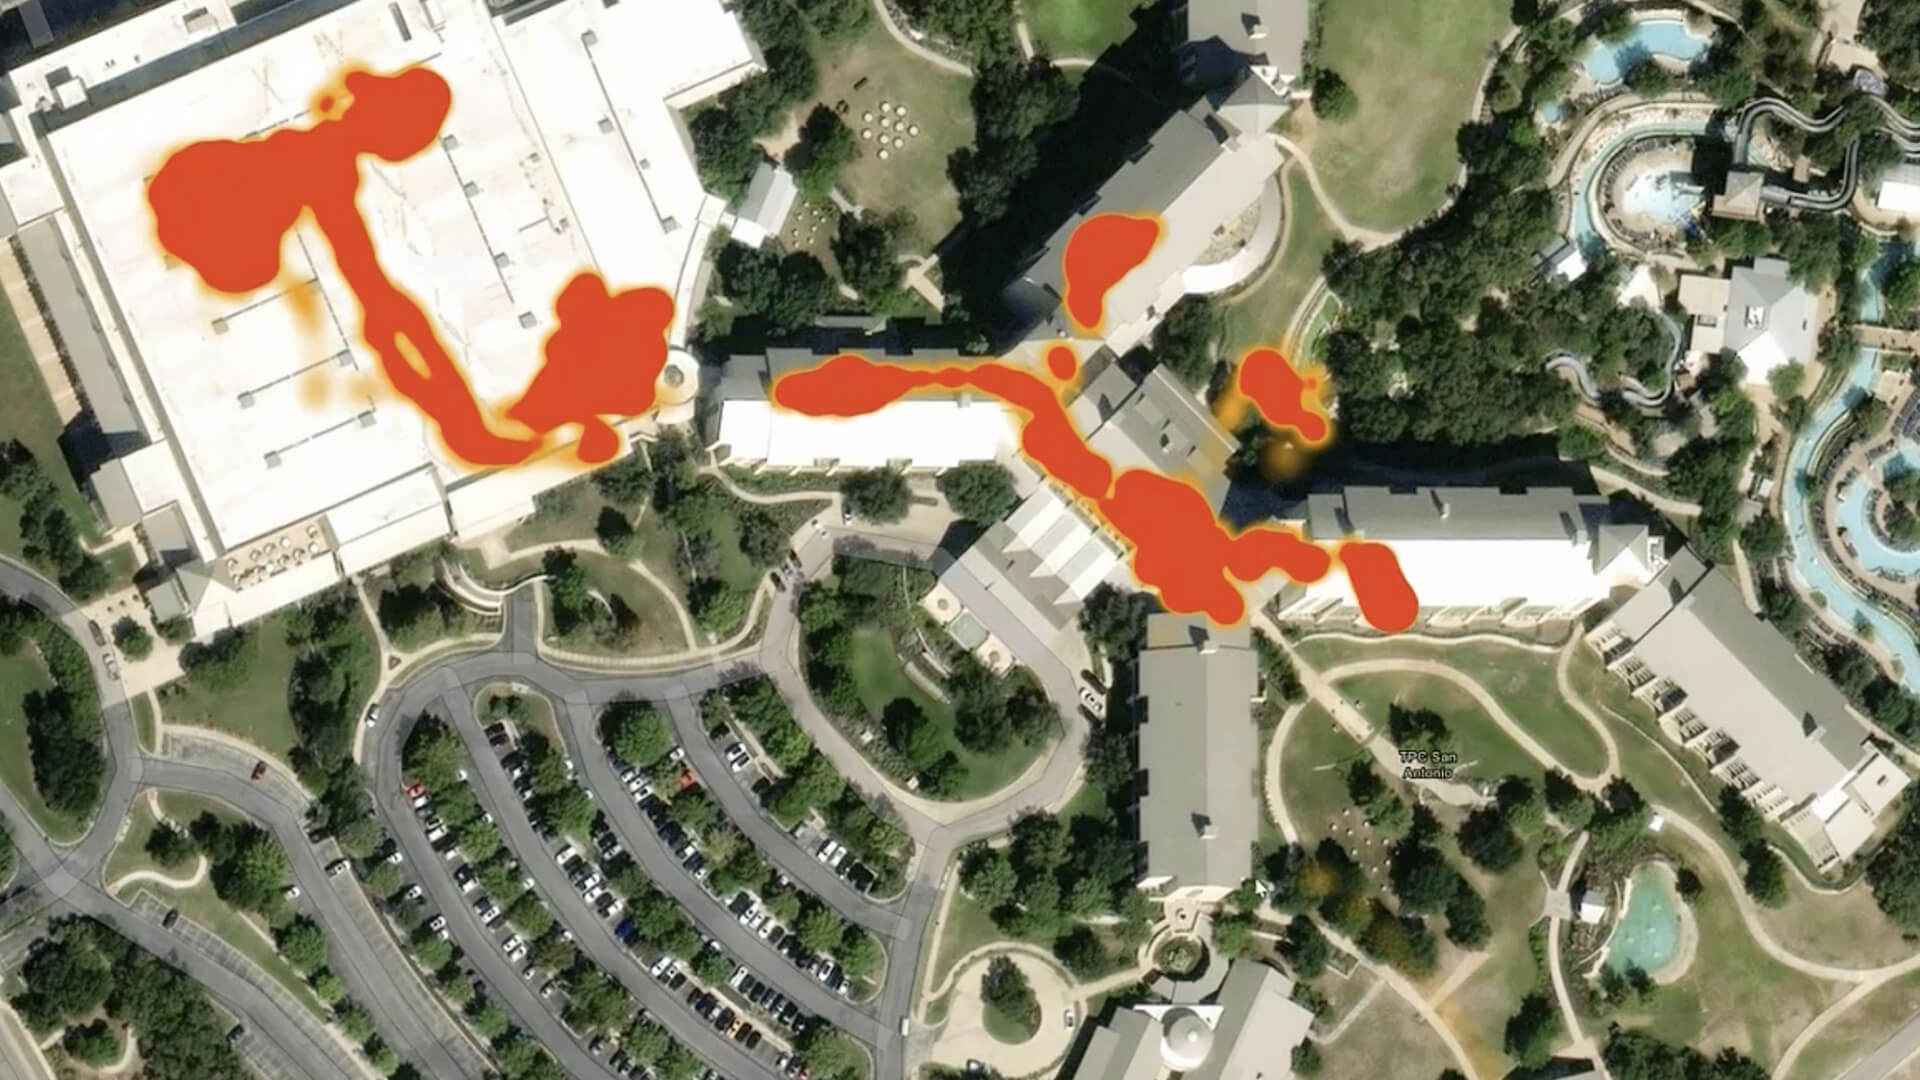 A heat map showing a hypothetical executive\'s movement through a venue, as monitored by a GSOC